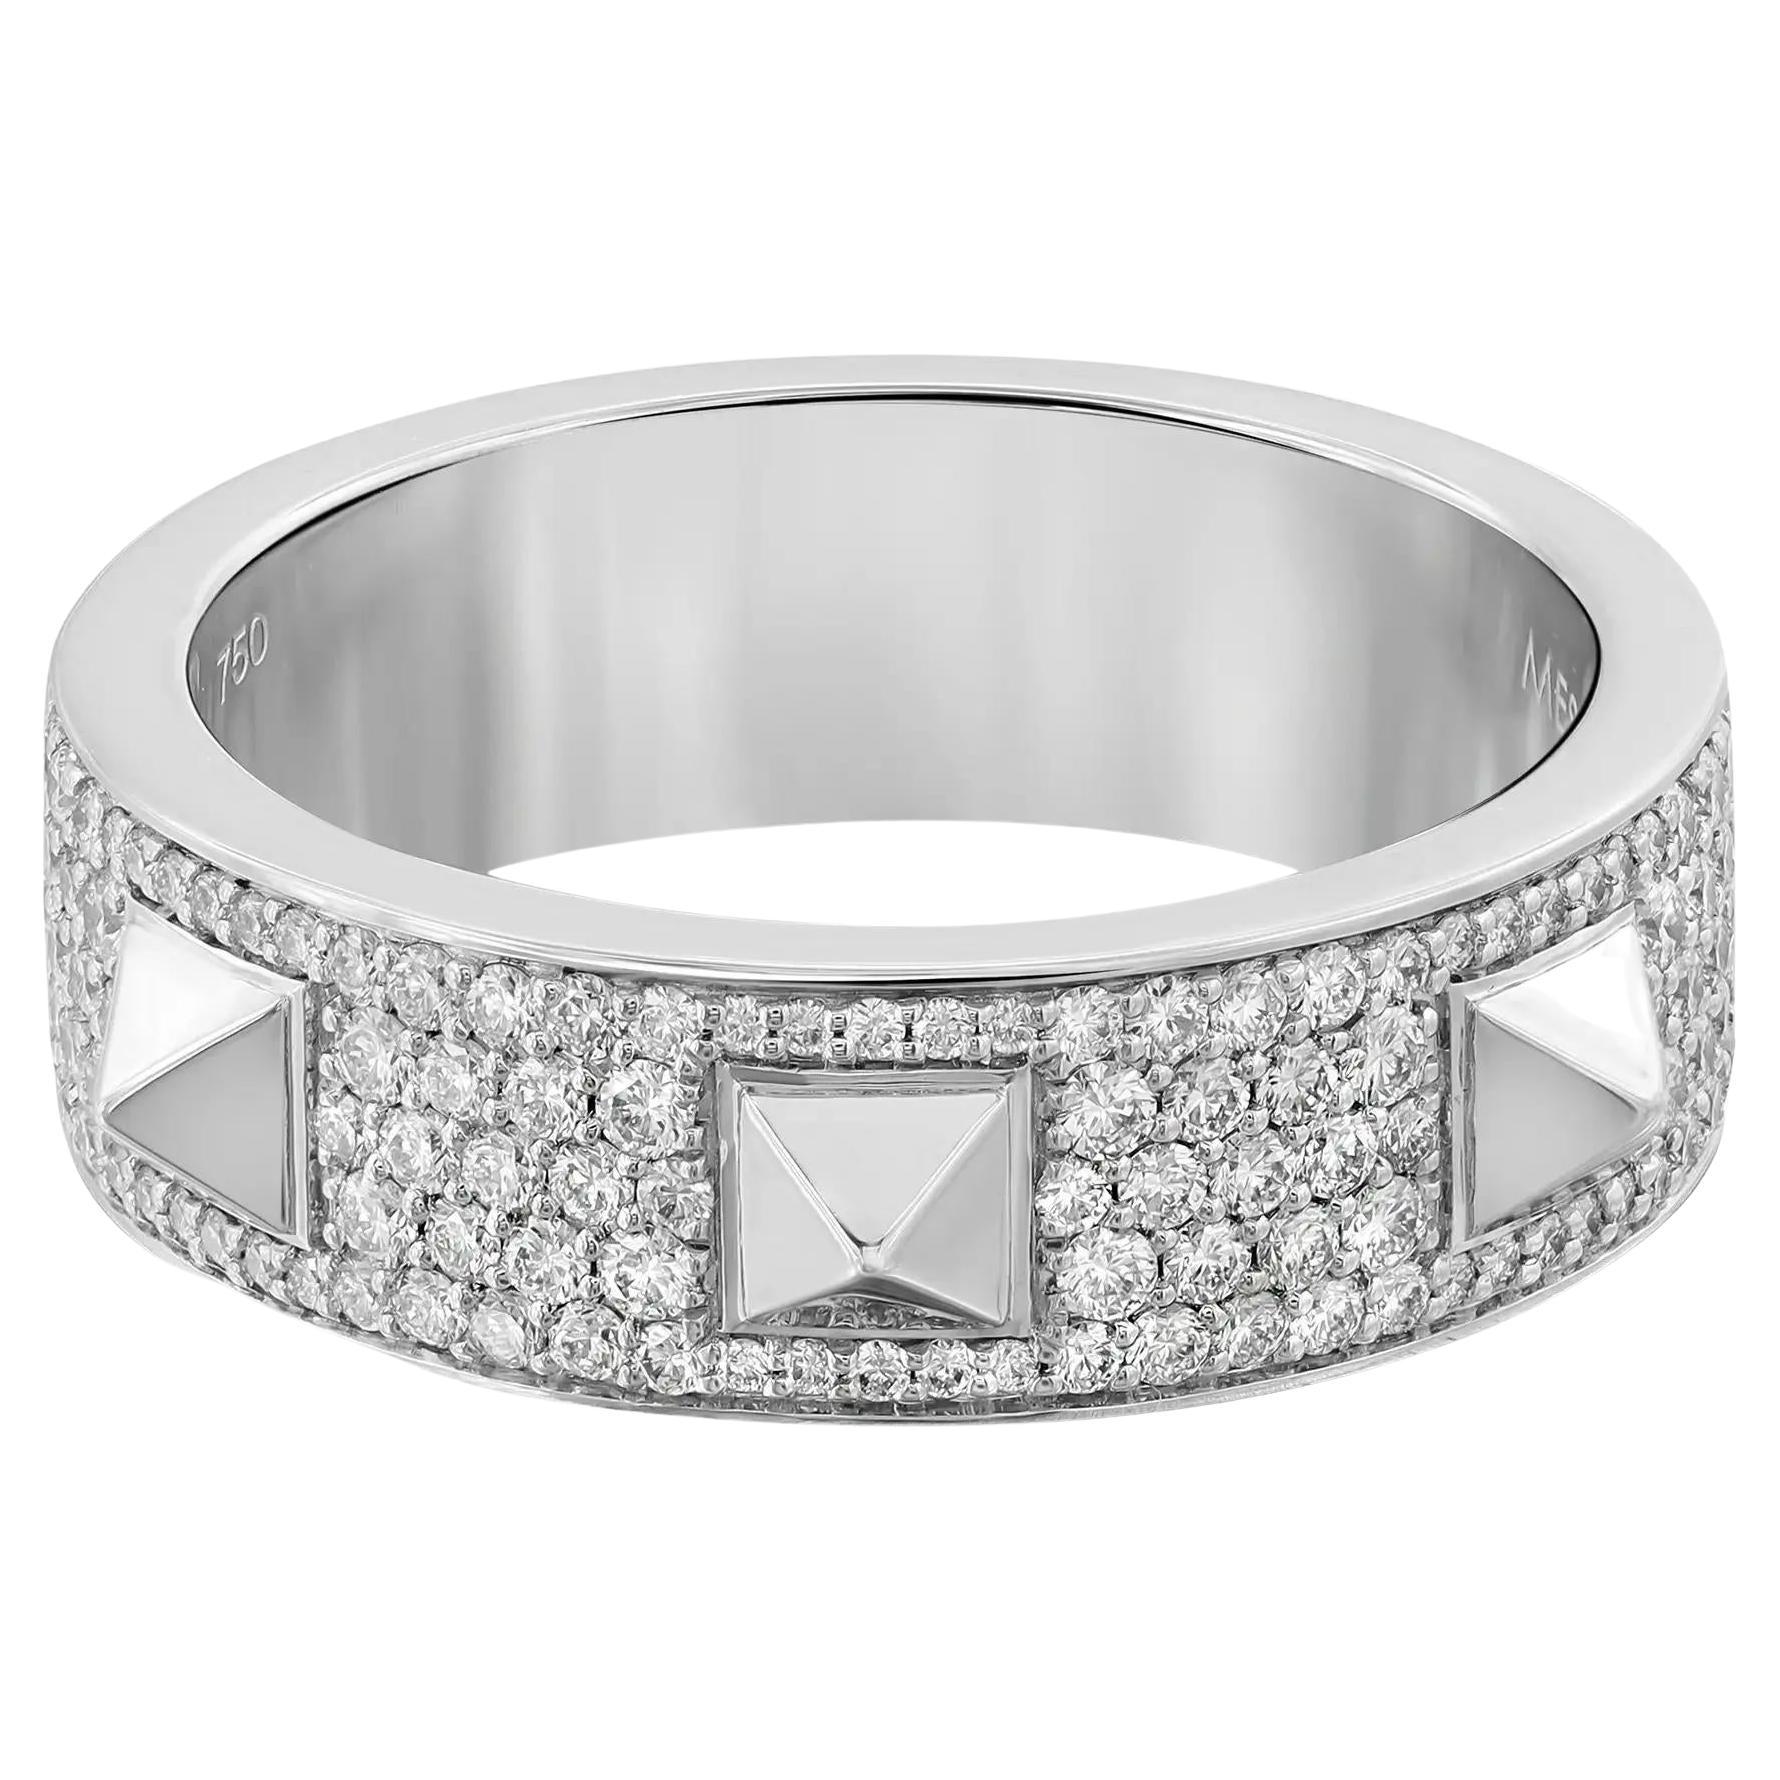 Messika 0.61Cttw Spiky Diamond Band Ring 18K White Gold Size 56 US 8 For Sale